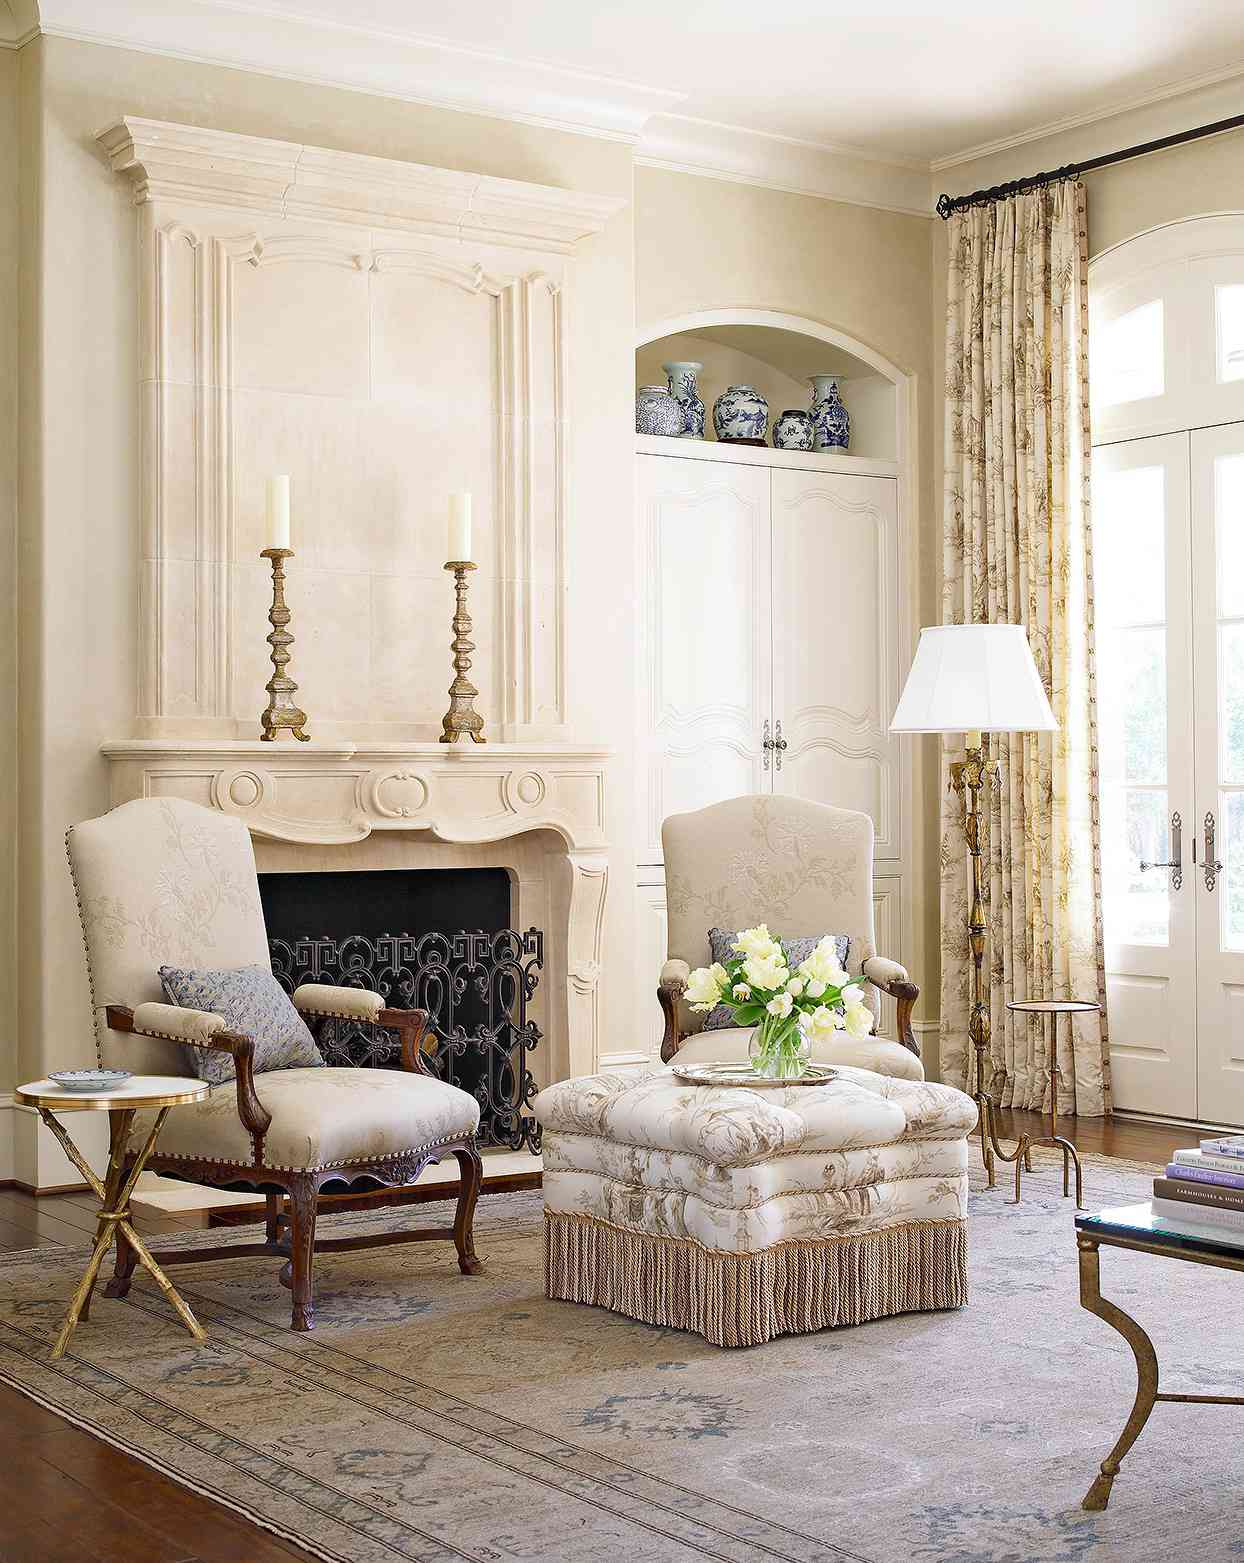 BEAUTIFUL DECORATIVE  FRENCH COUNTRY STYLE FURNITURE/ FIREPLACE MOULDINGS 